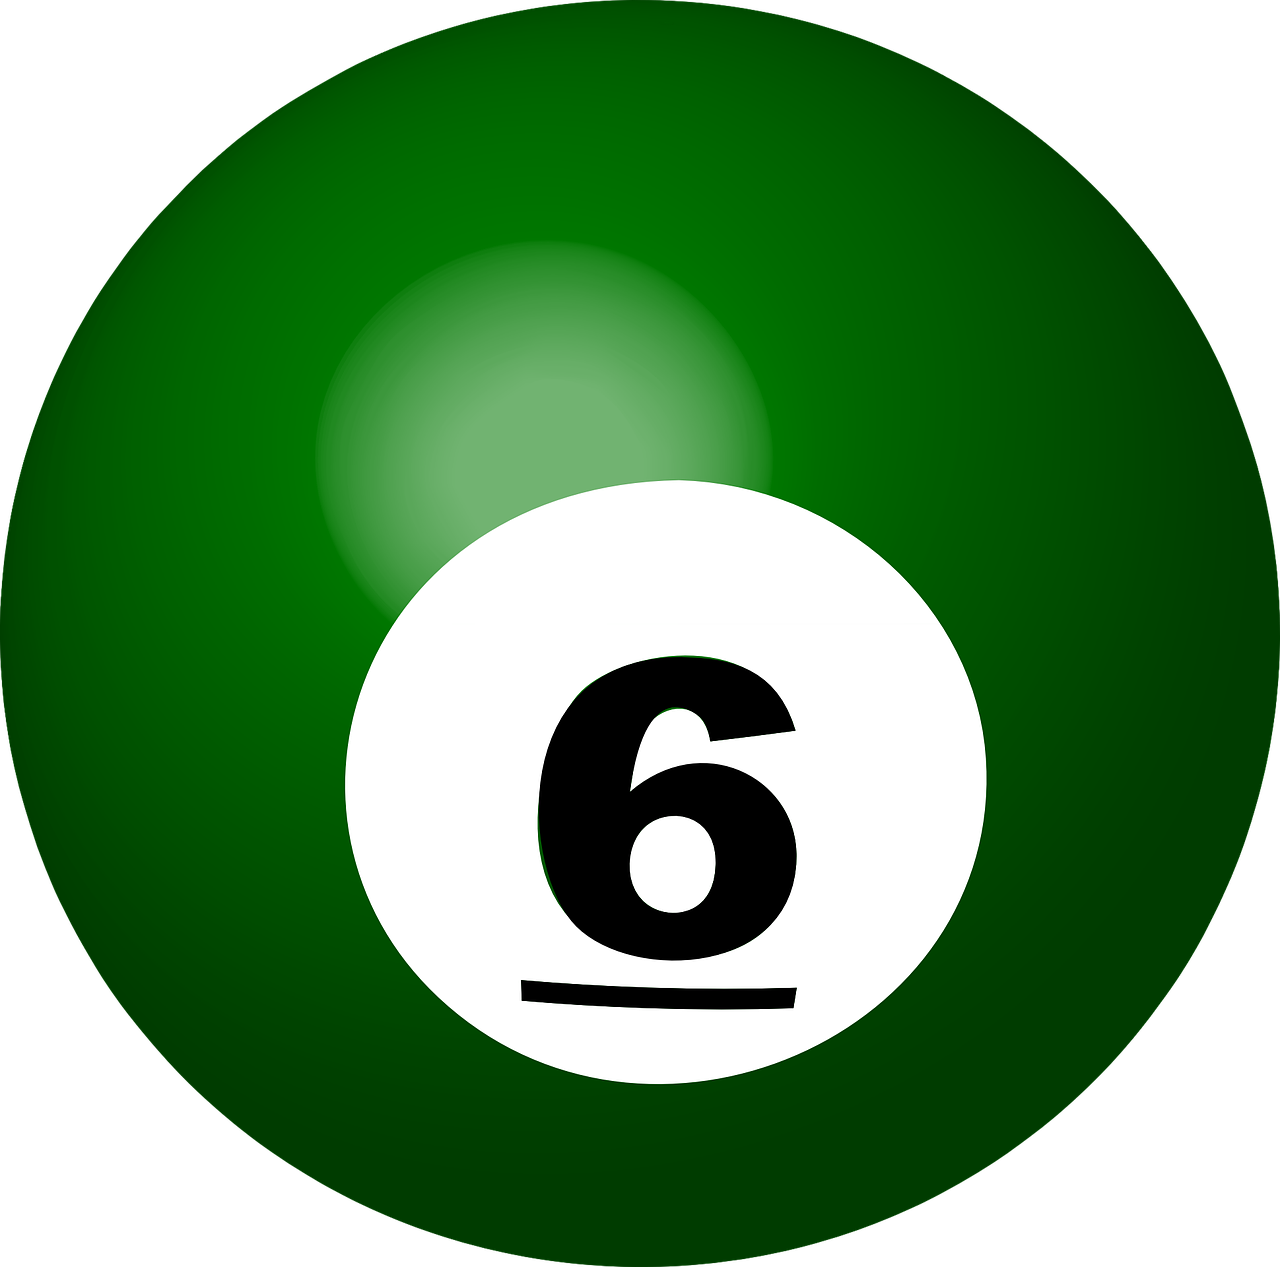 A Green Pool Ball With A Number On It